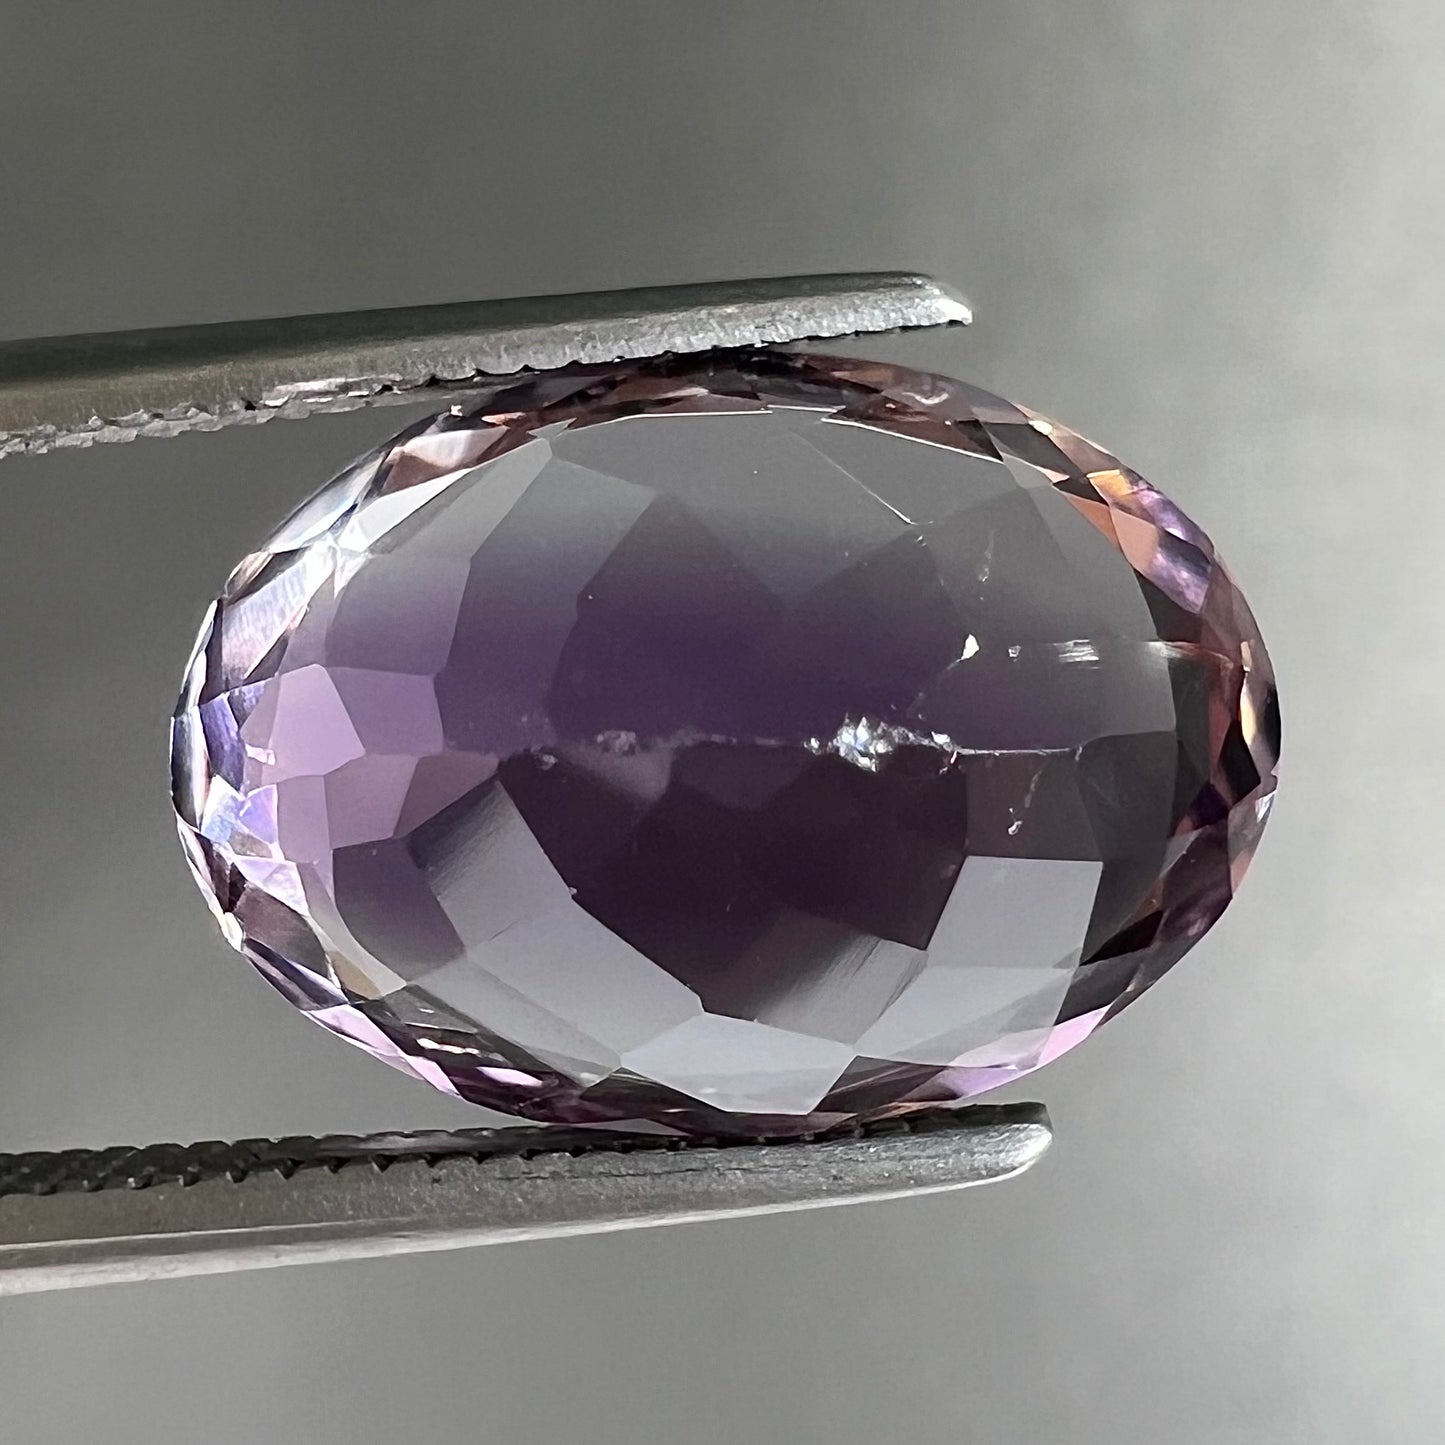 A faceted oval cut amethyst gemstone.  The stone is a light purple color.